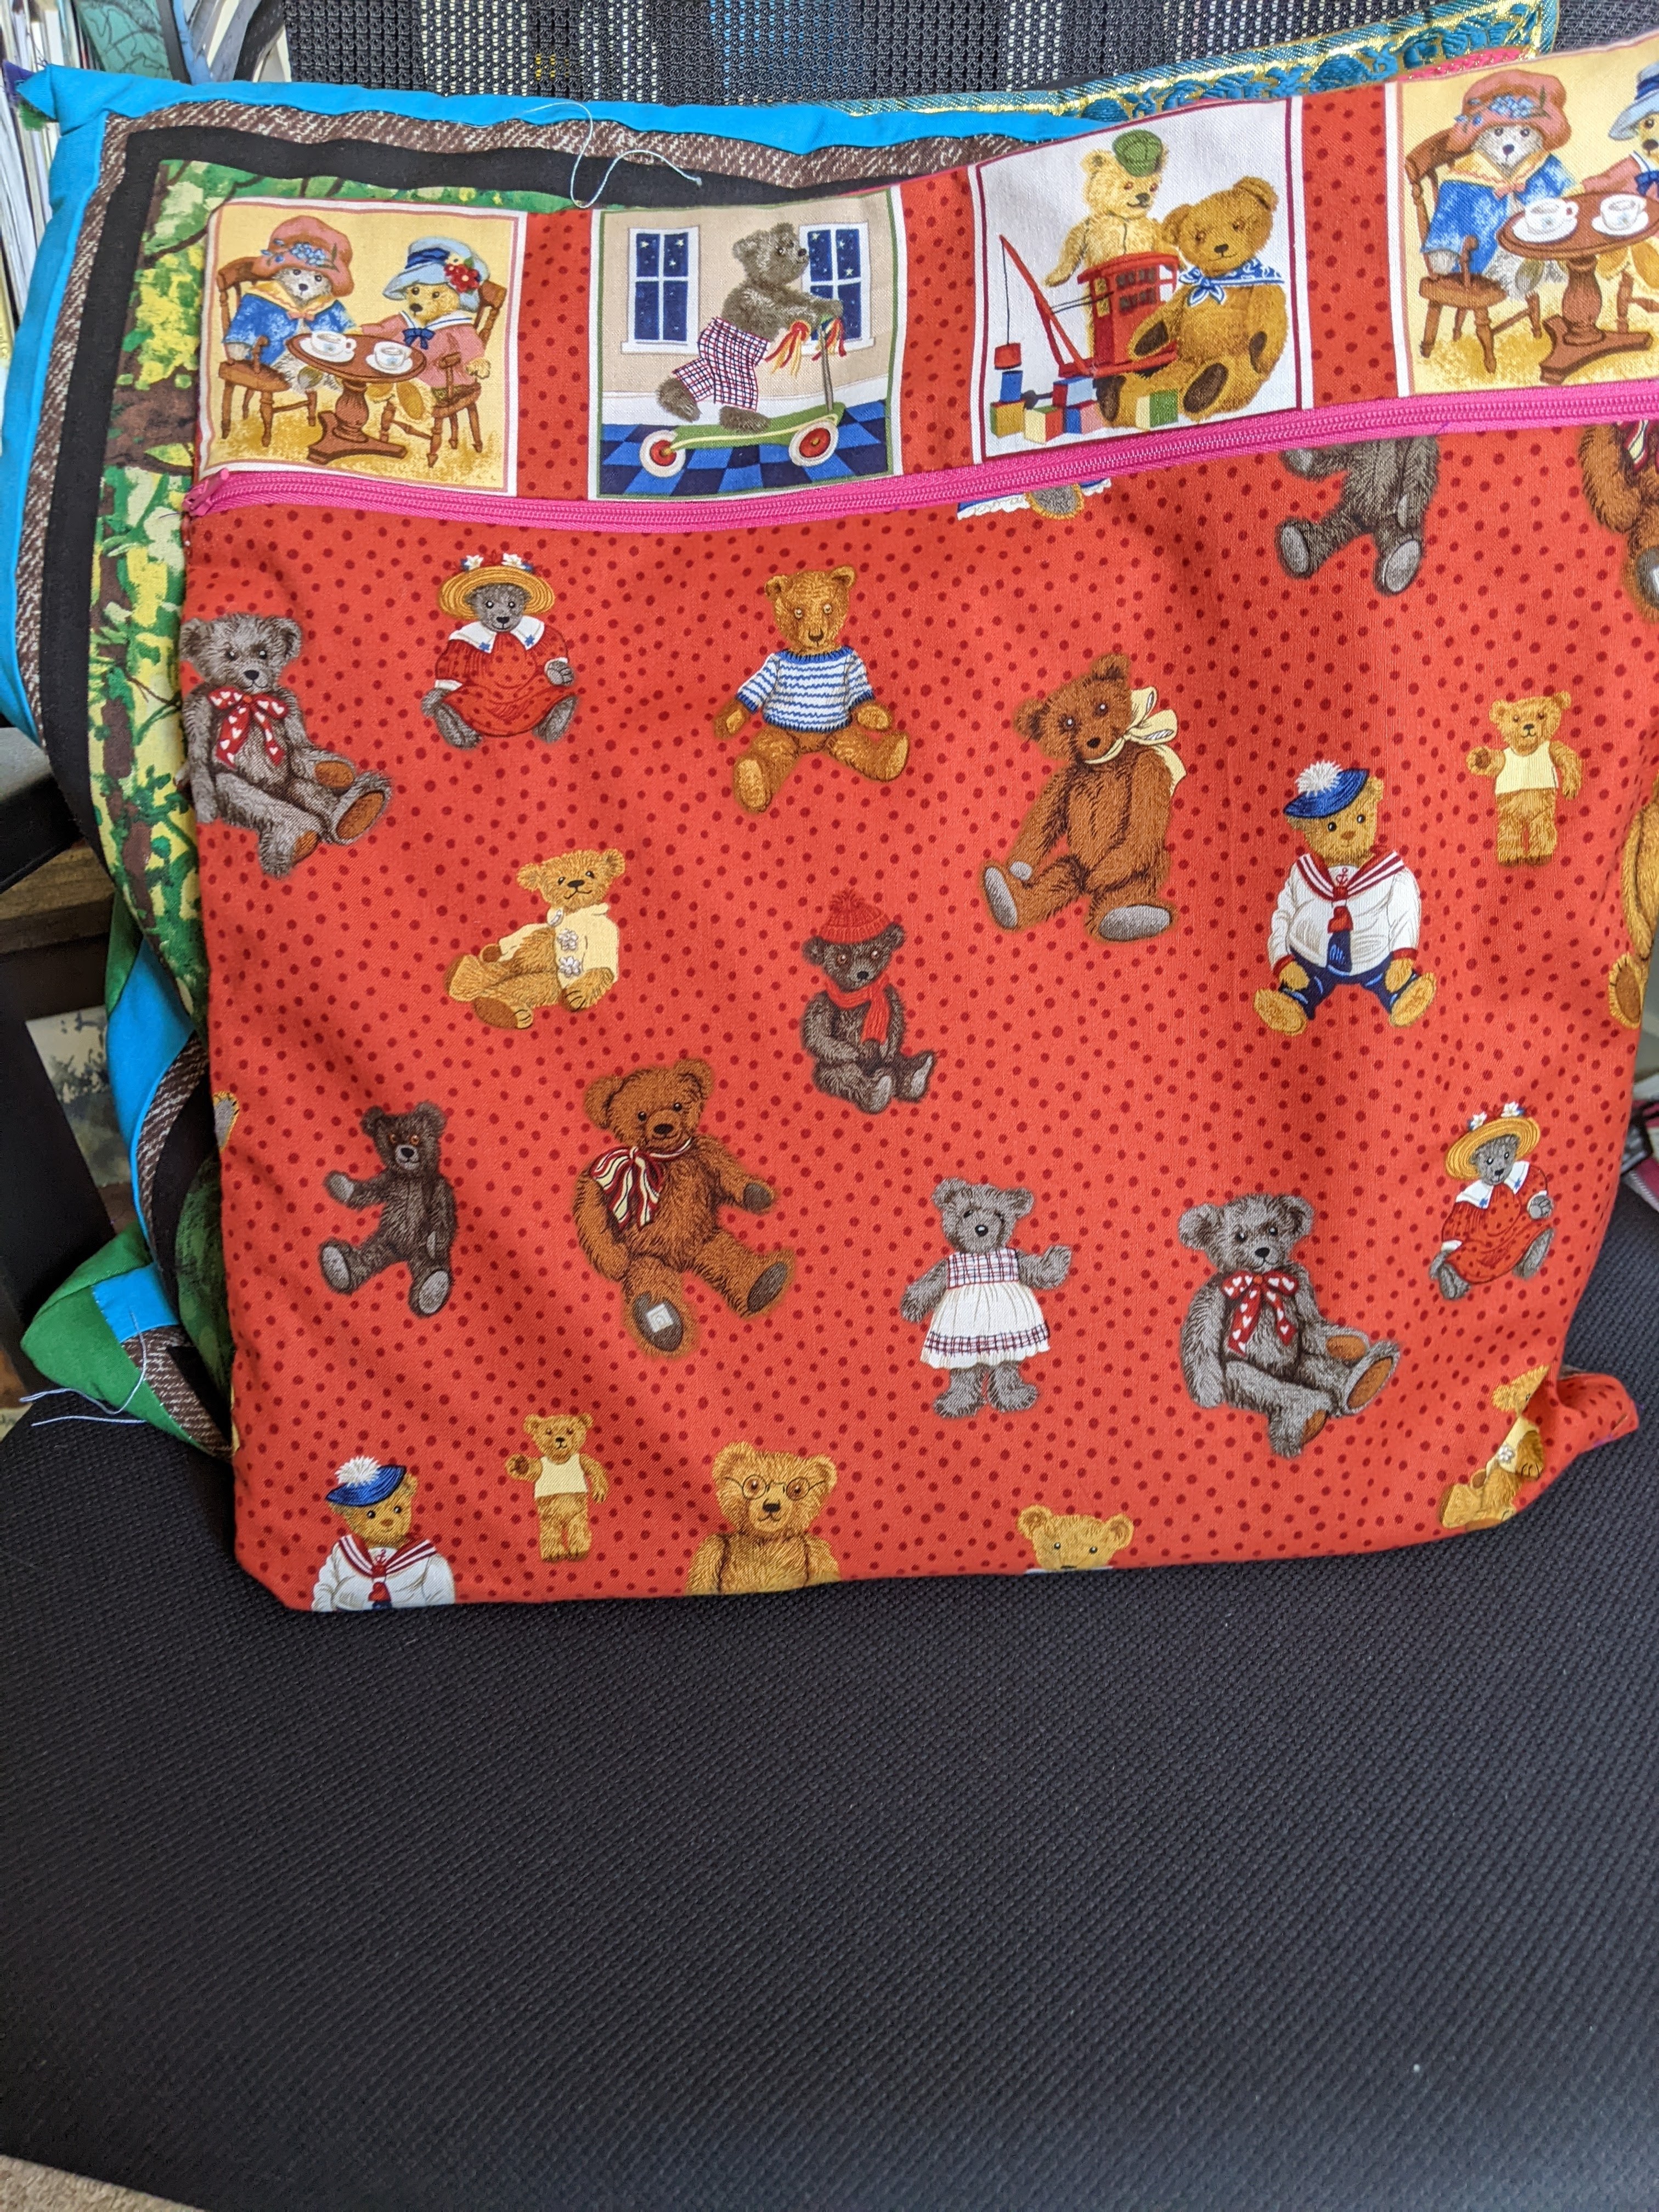 project bags for cross stitch – The XStitching Runner